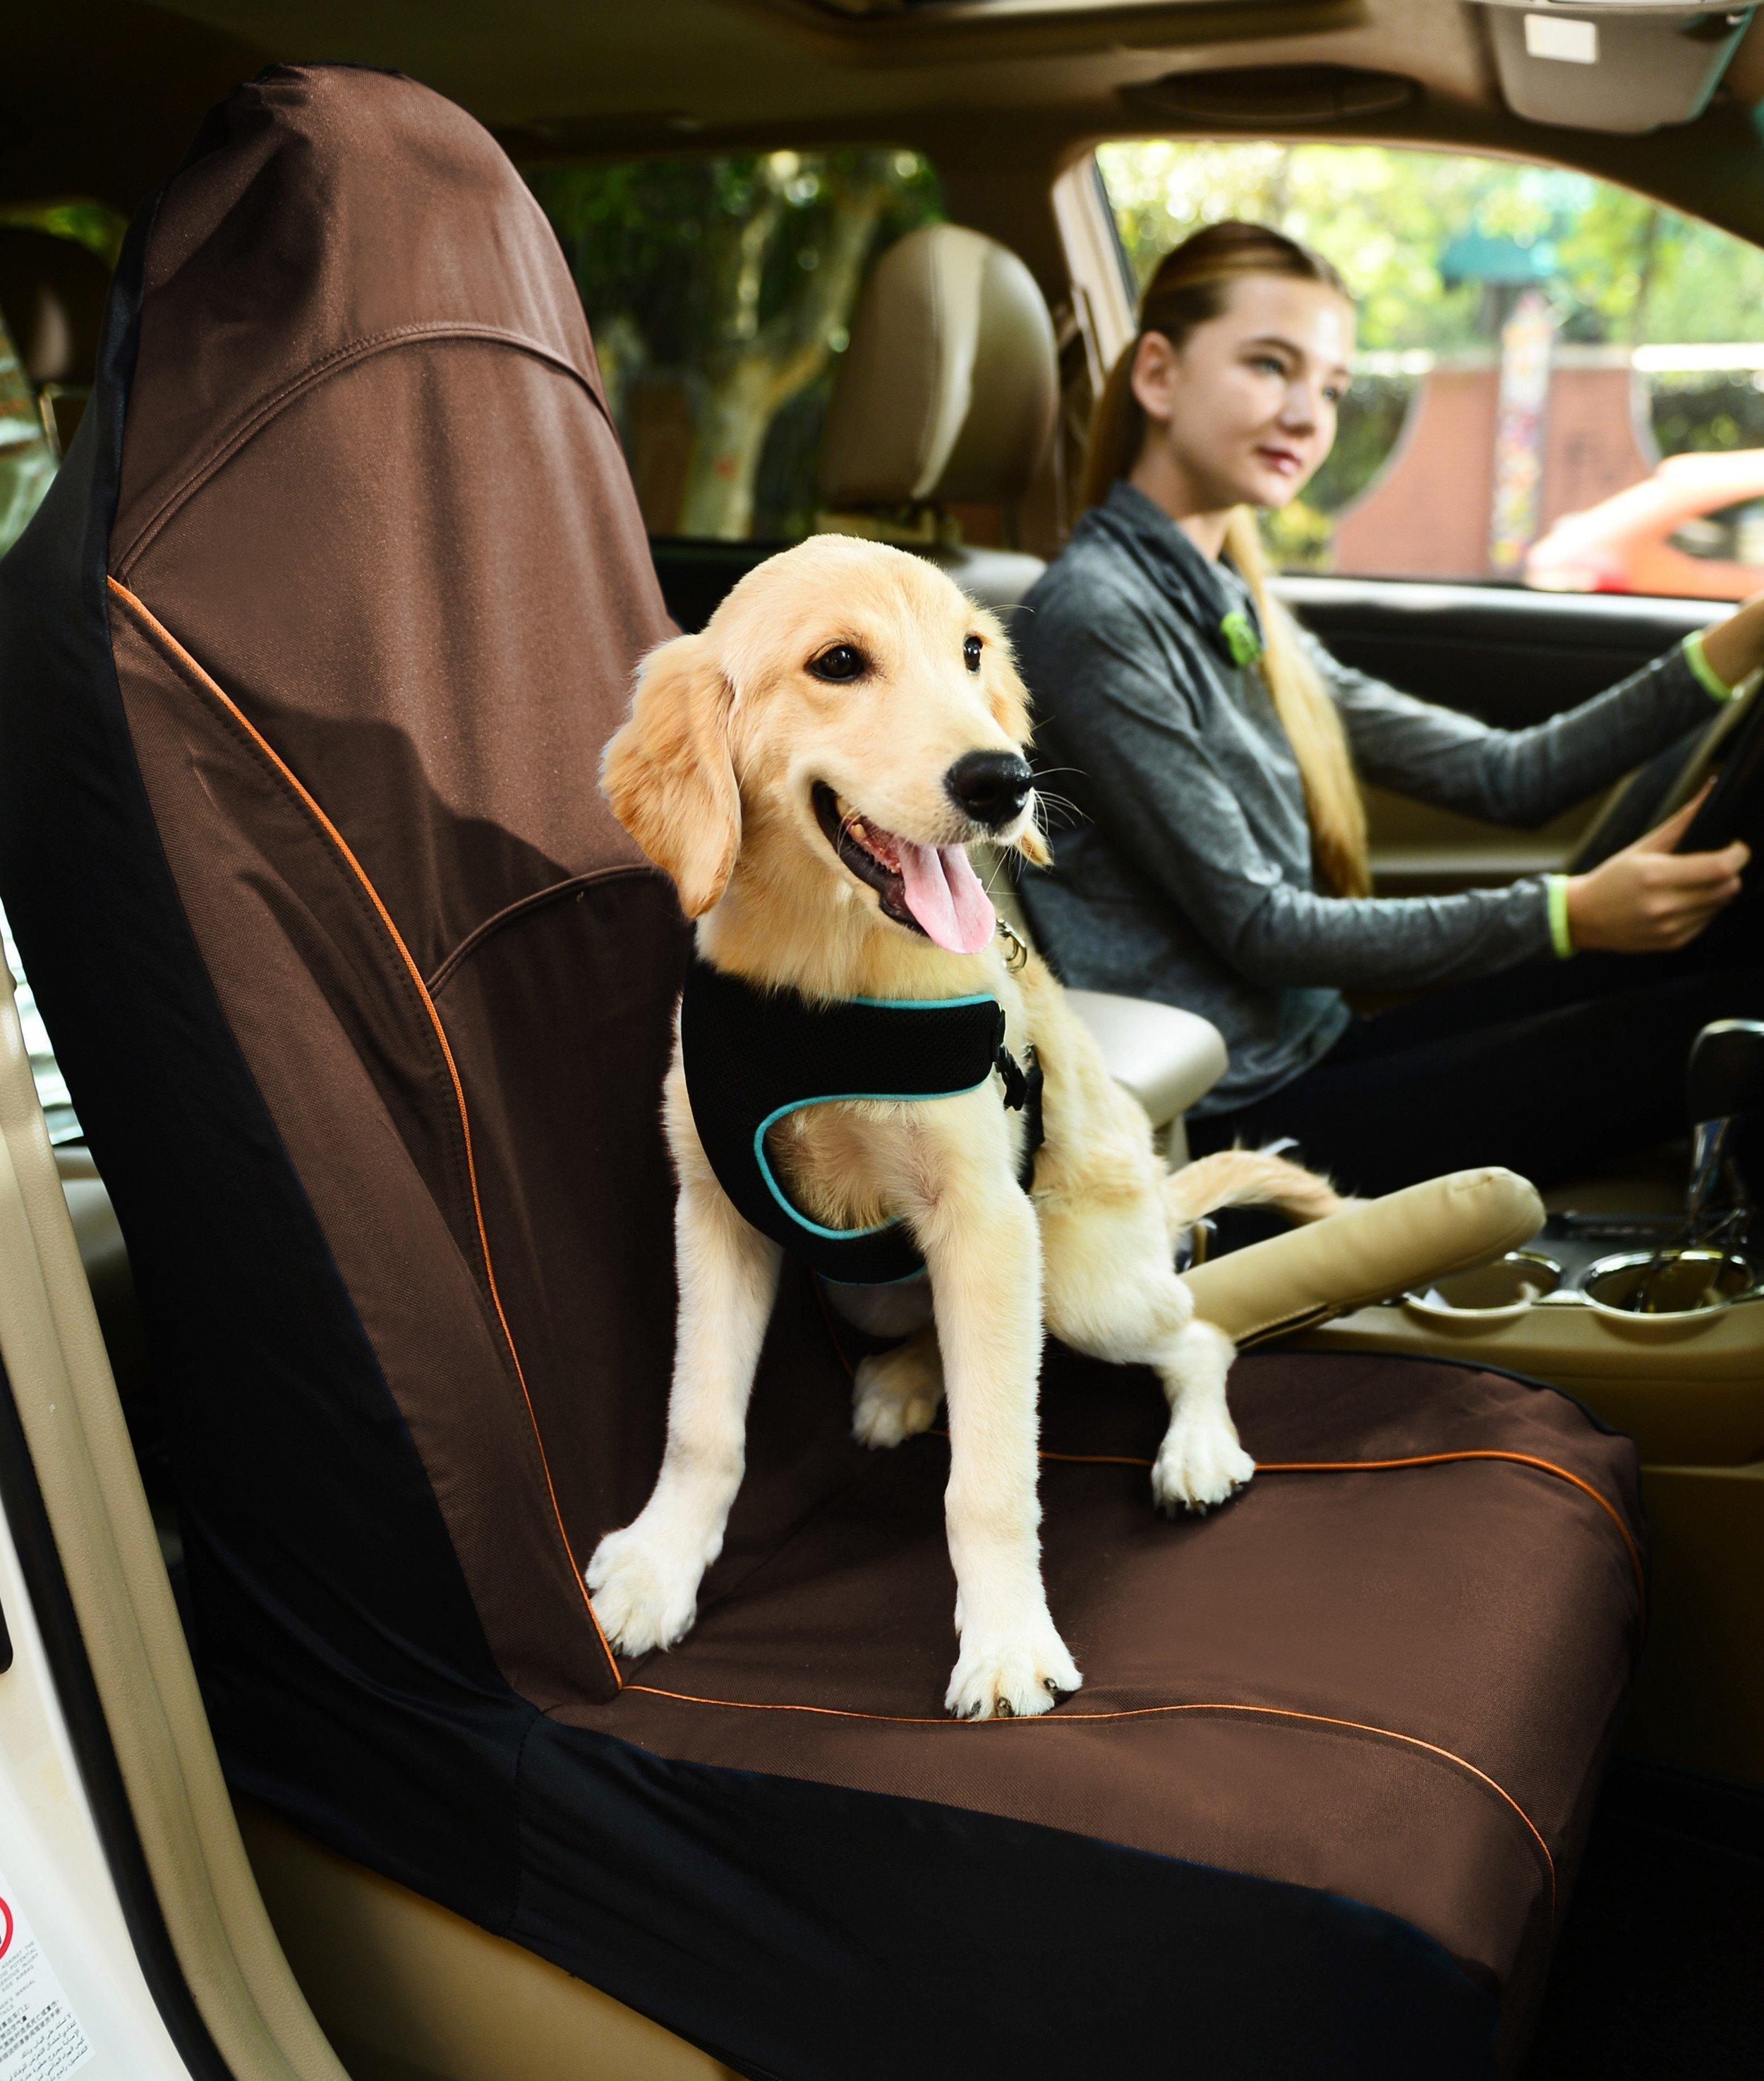 Pet Life ® 'Open Road' Single Seated Safety Child Pet Cat Dog Car Seat Carseat Cover Protector Brown 